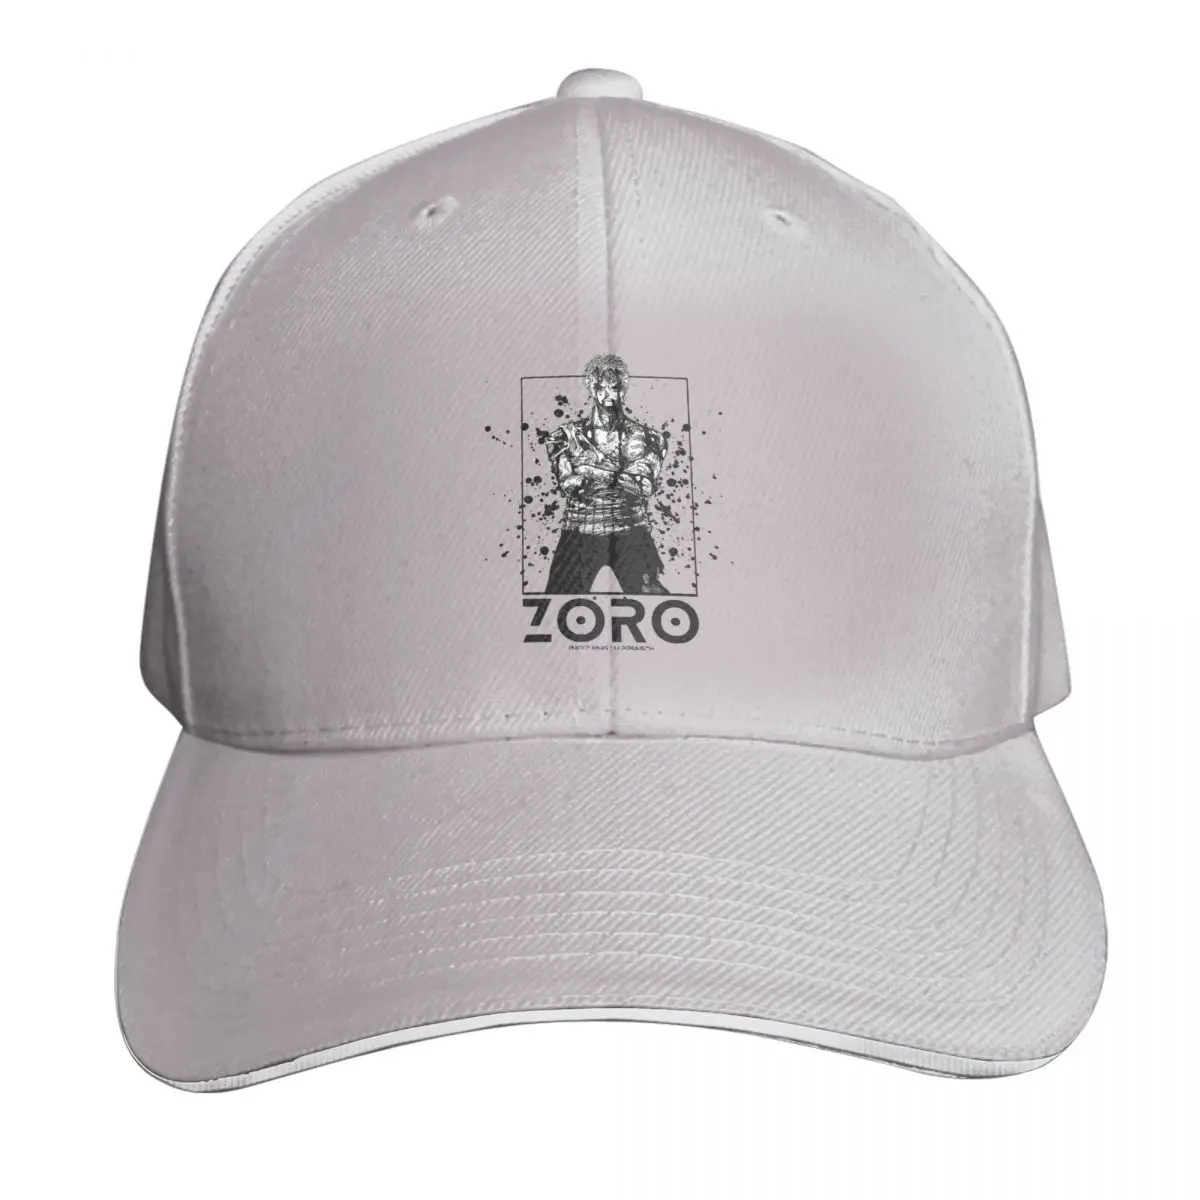 

Roronoa Zoro Nothing Happened From Manga Casquette, Polyester Cap Holiday Moisture Wicking Curved Brim